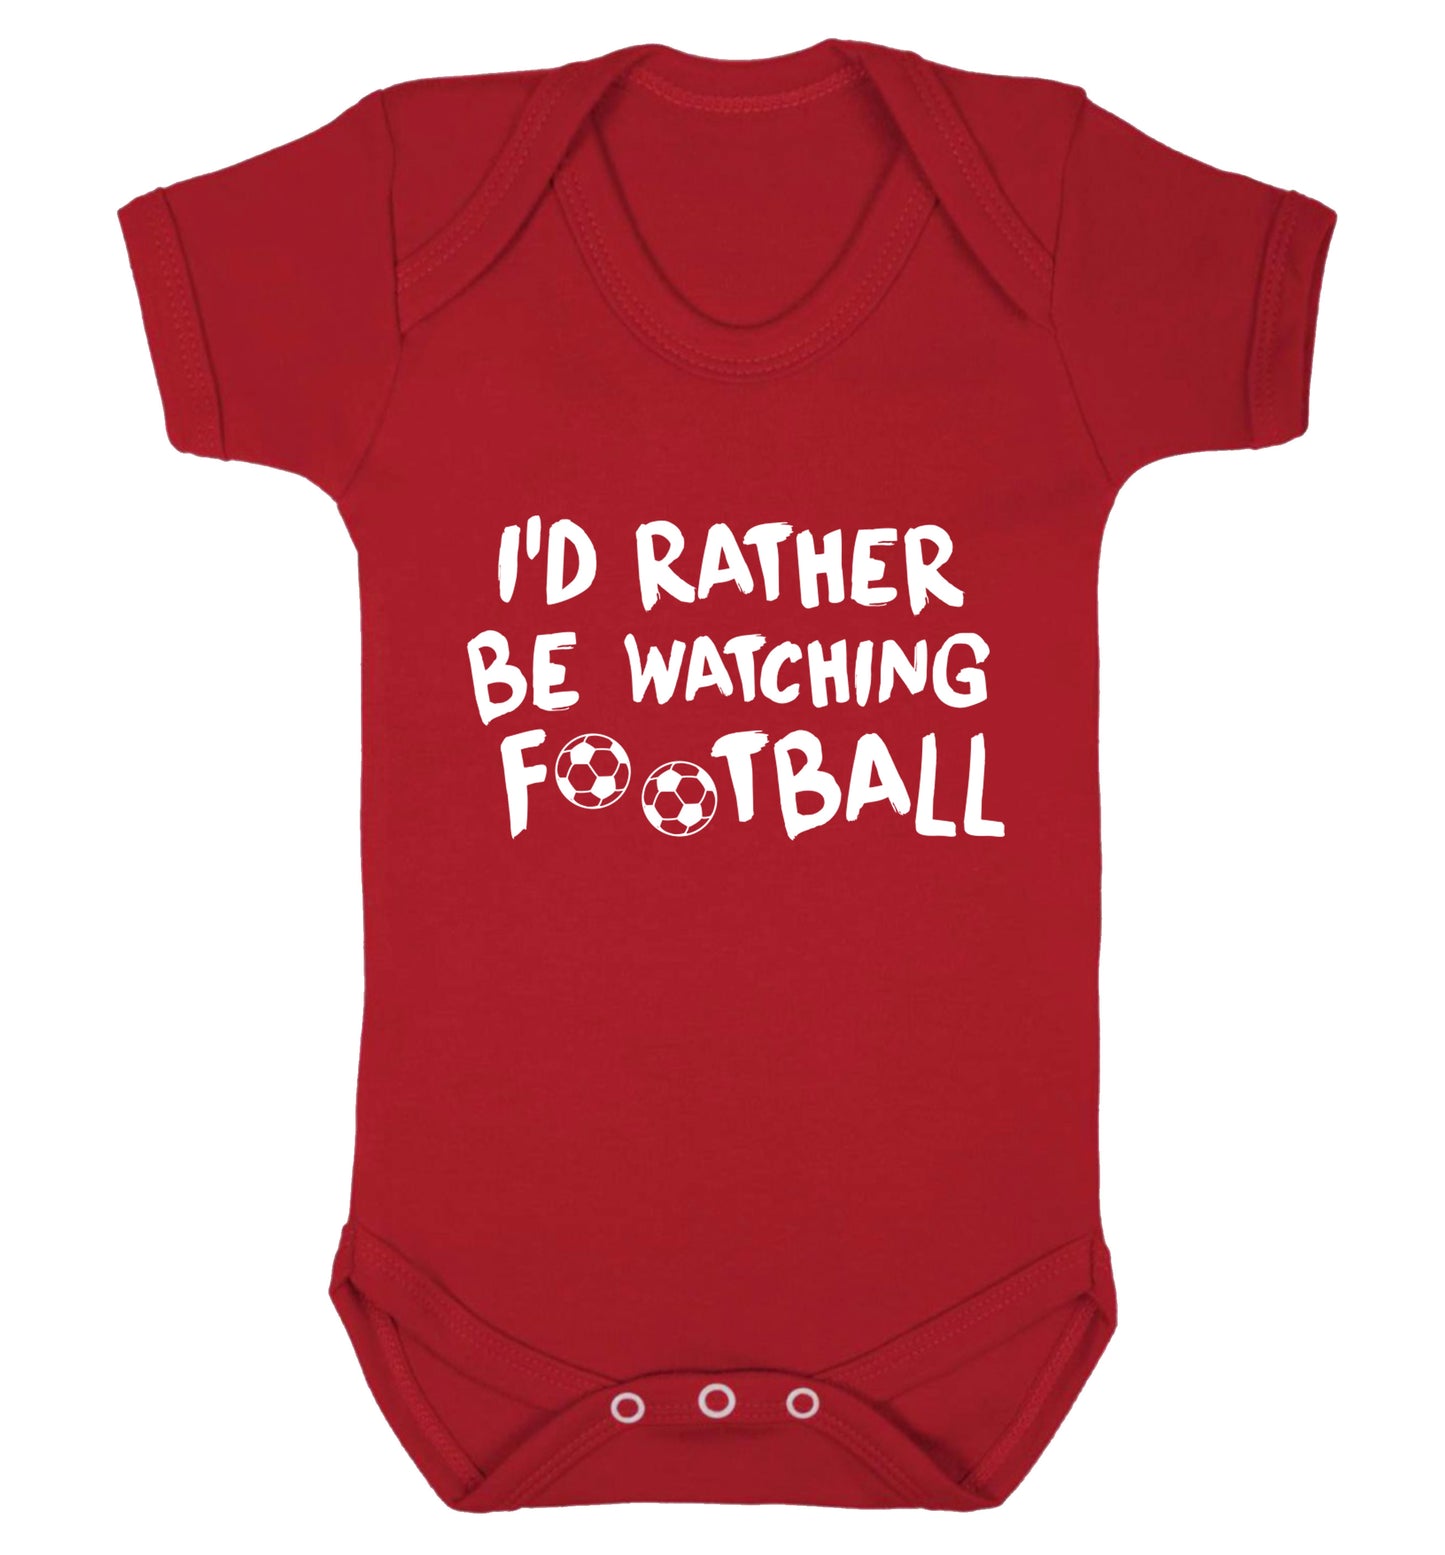 I'd rather be watching football Baby Vest red 18-24 months